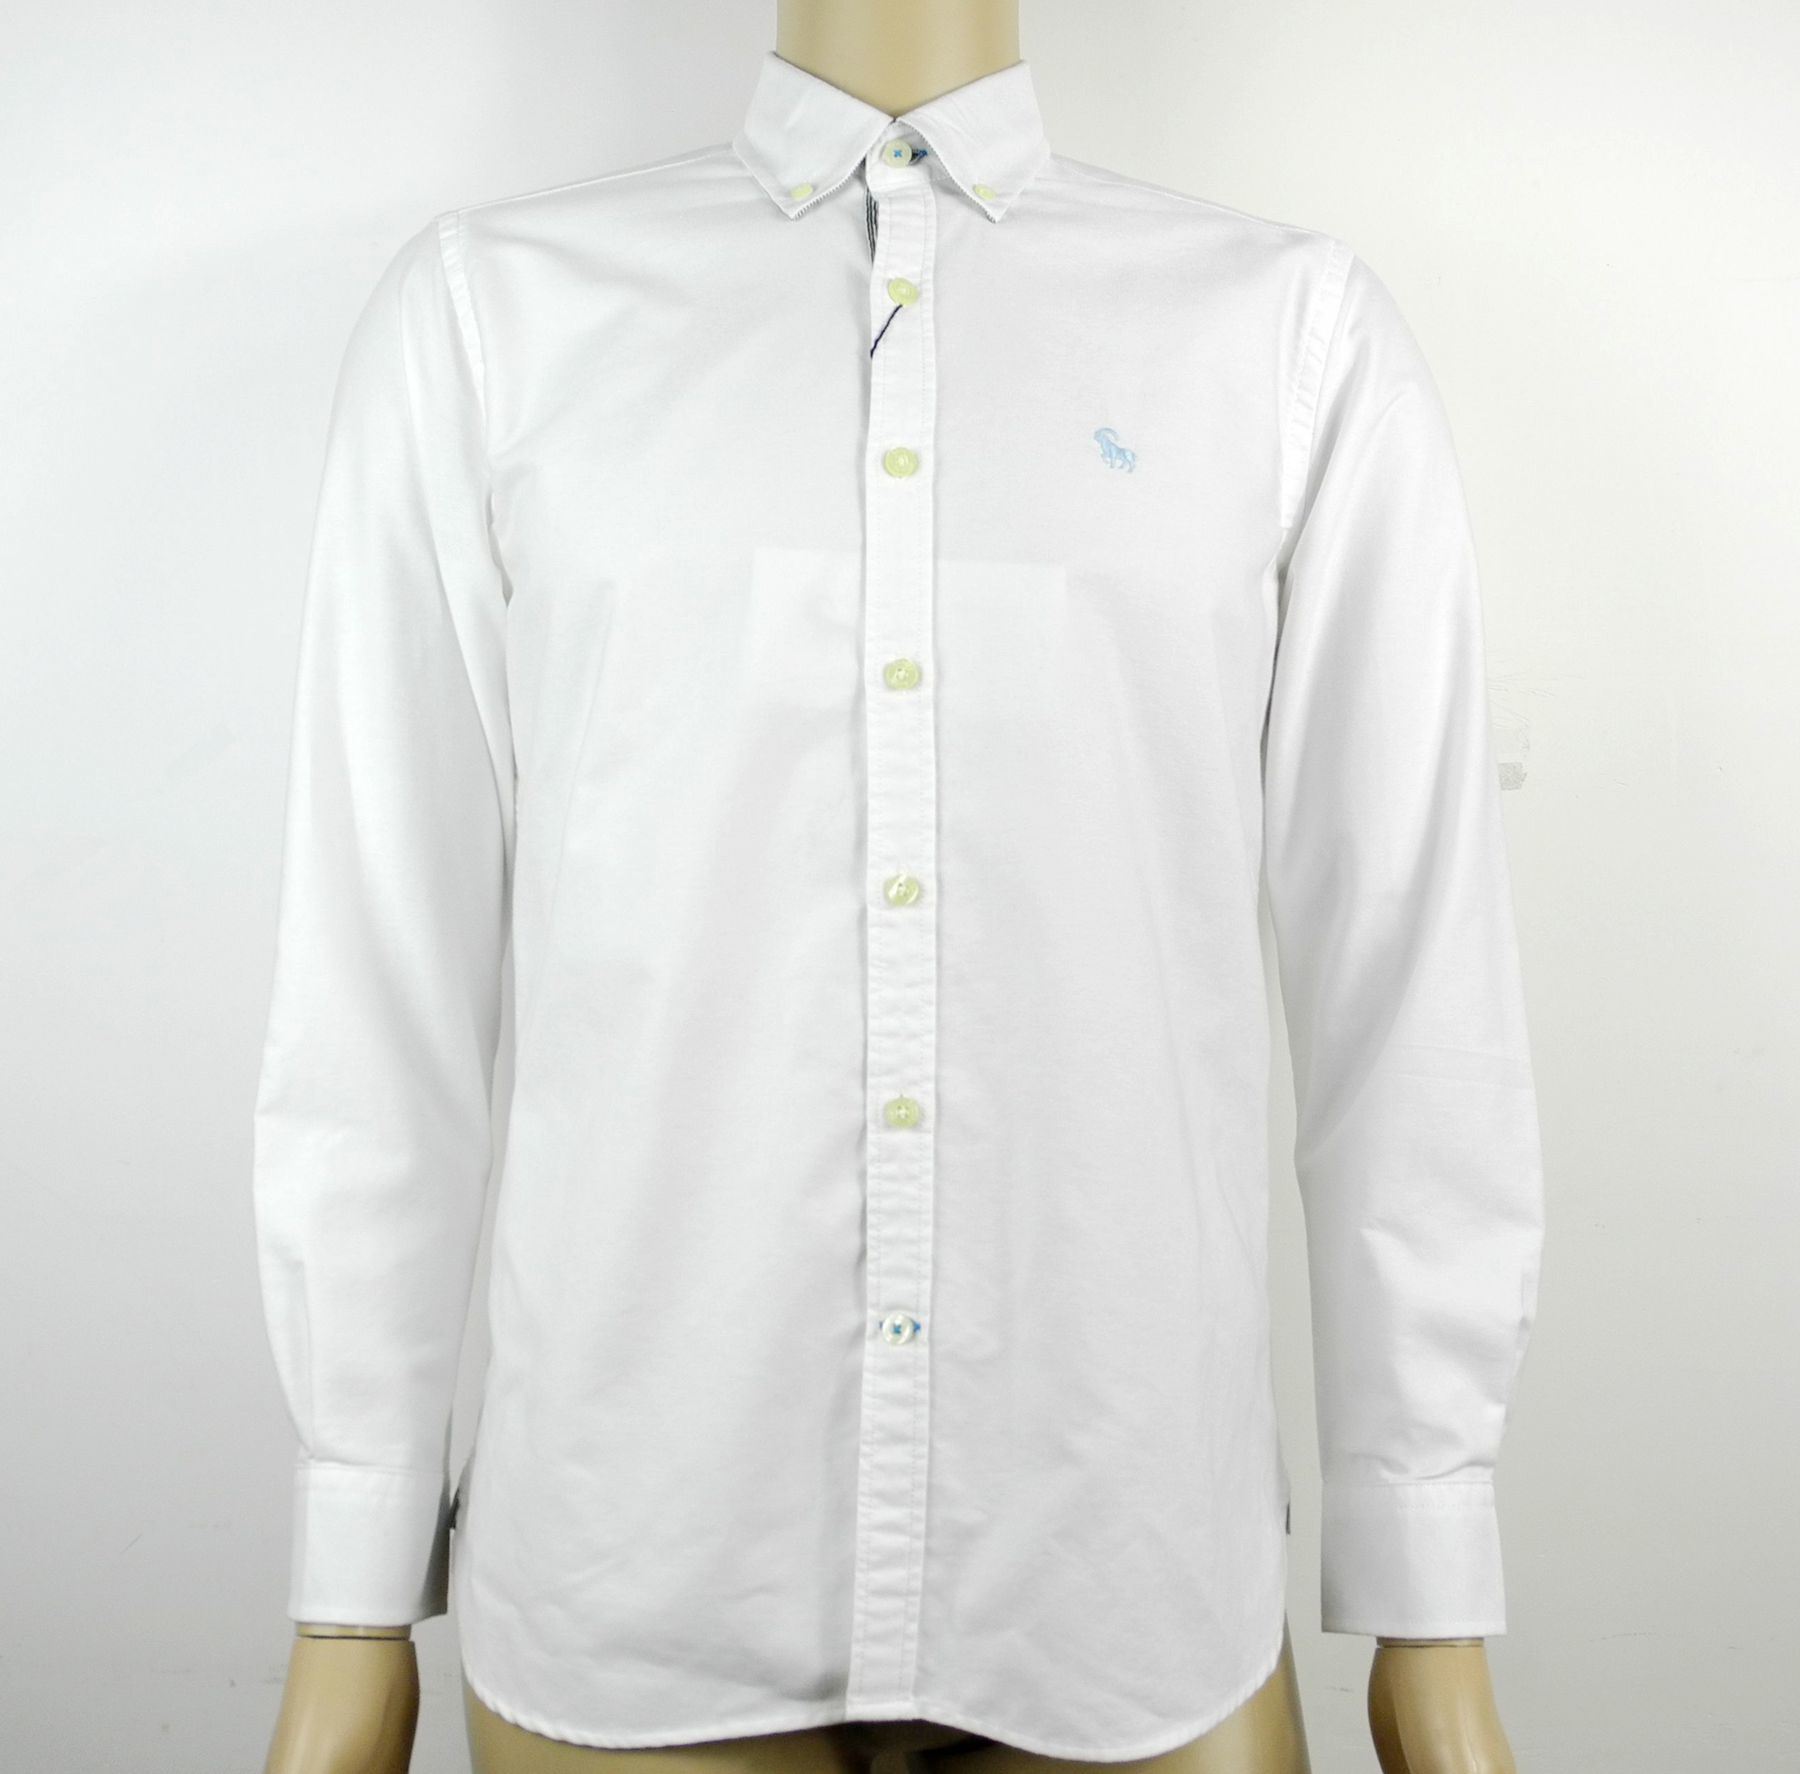 Men's Stock Long Sleeves Shirts in Stock Clothes with Cheap Price